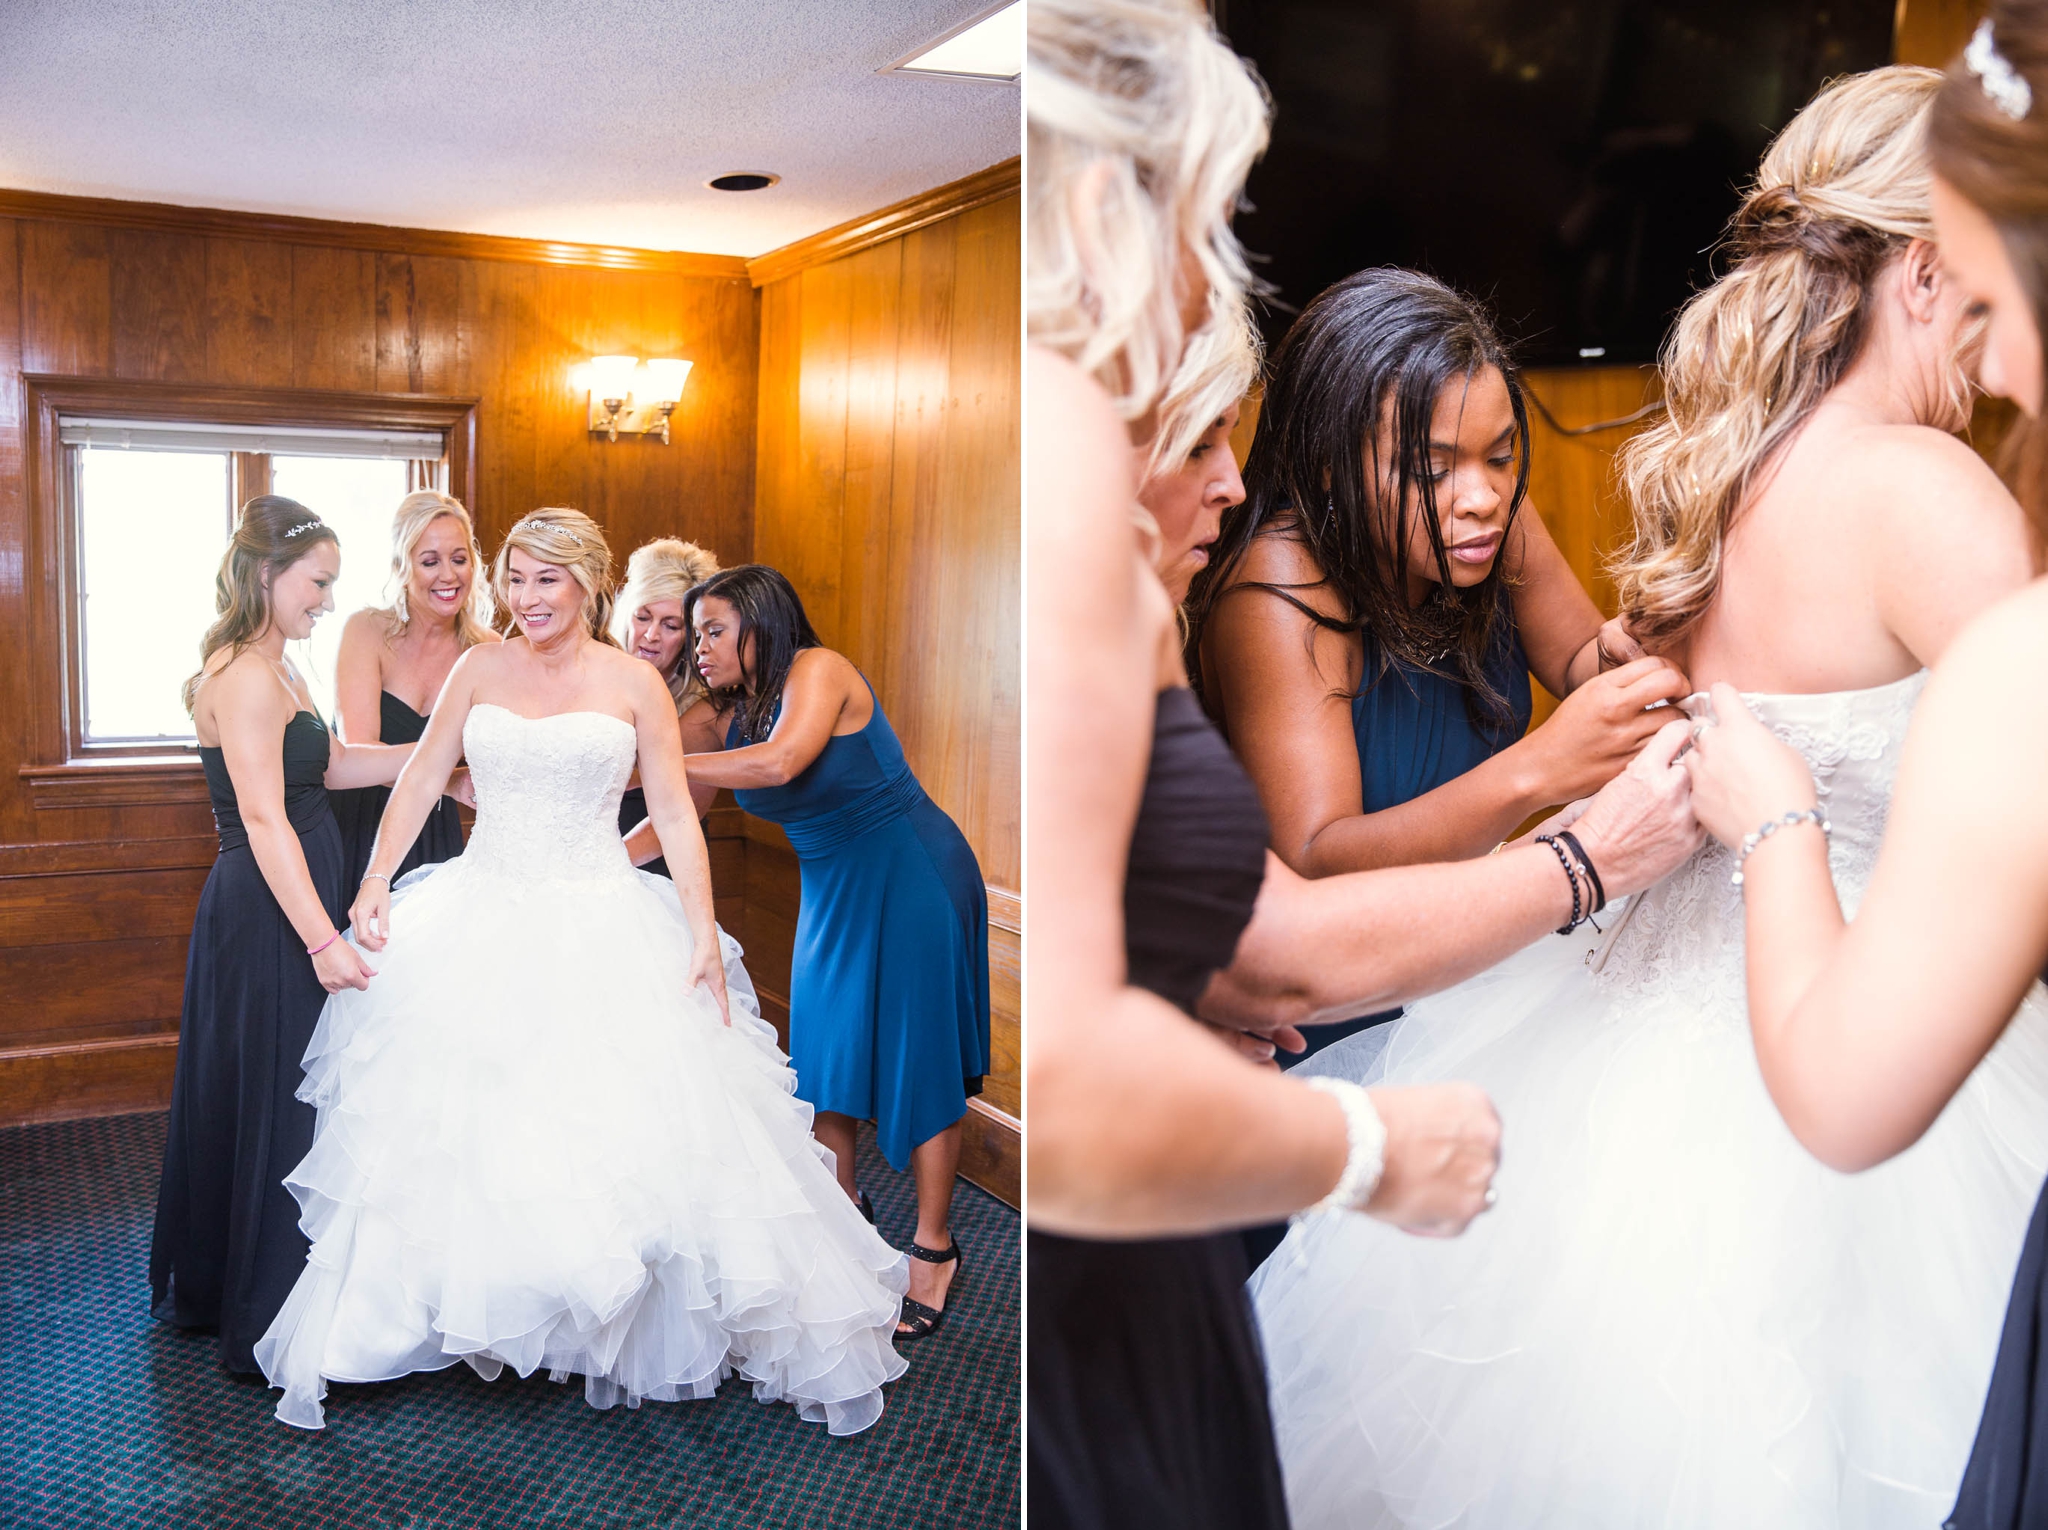 Bridesmaids helping the bride into the dress - Dona + Doug - MacGregor Downs Country Club in Cary, NC - Raleigh Wedding Photographer